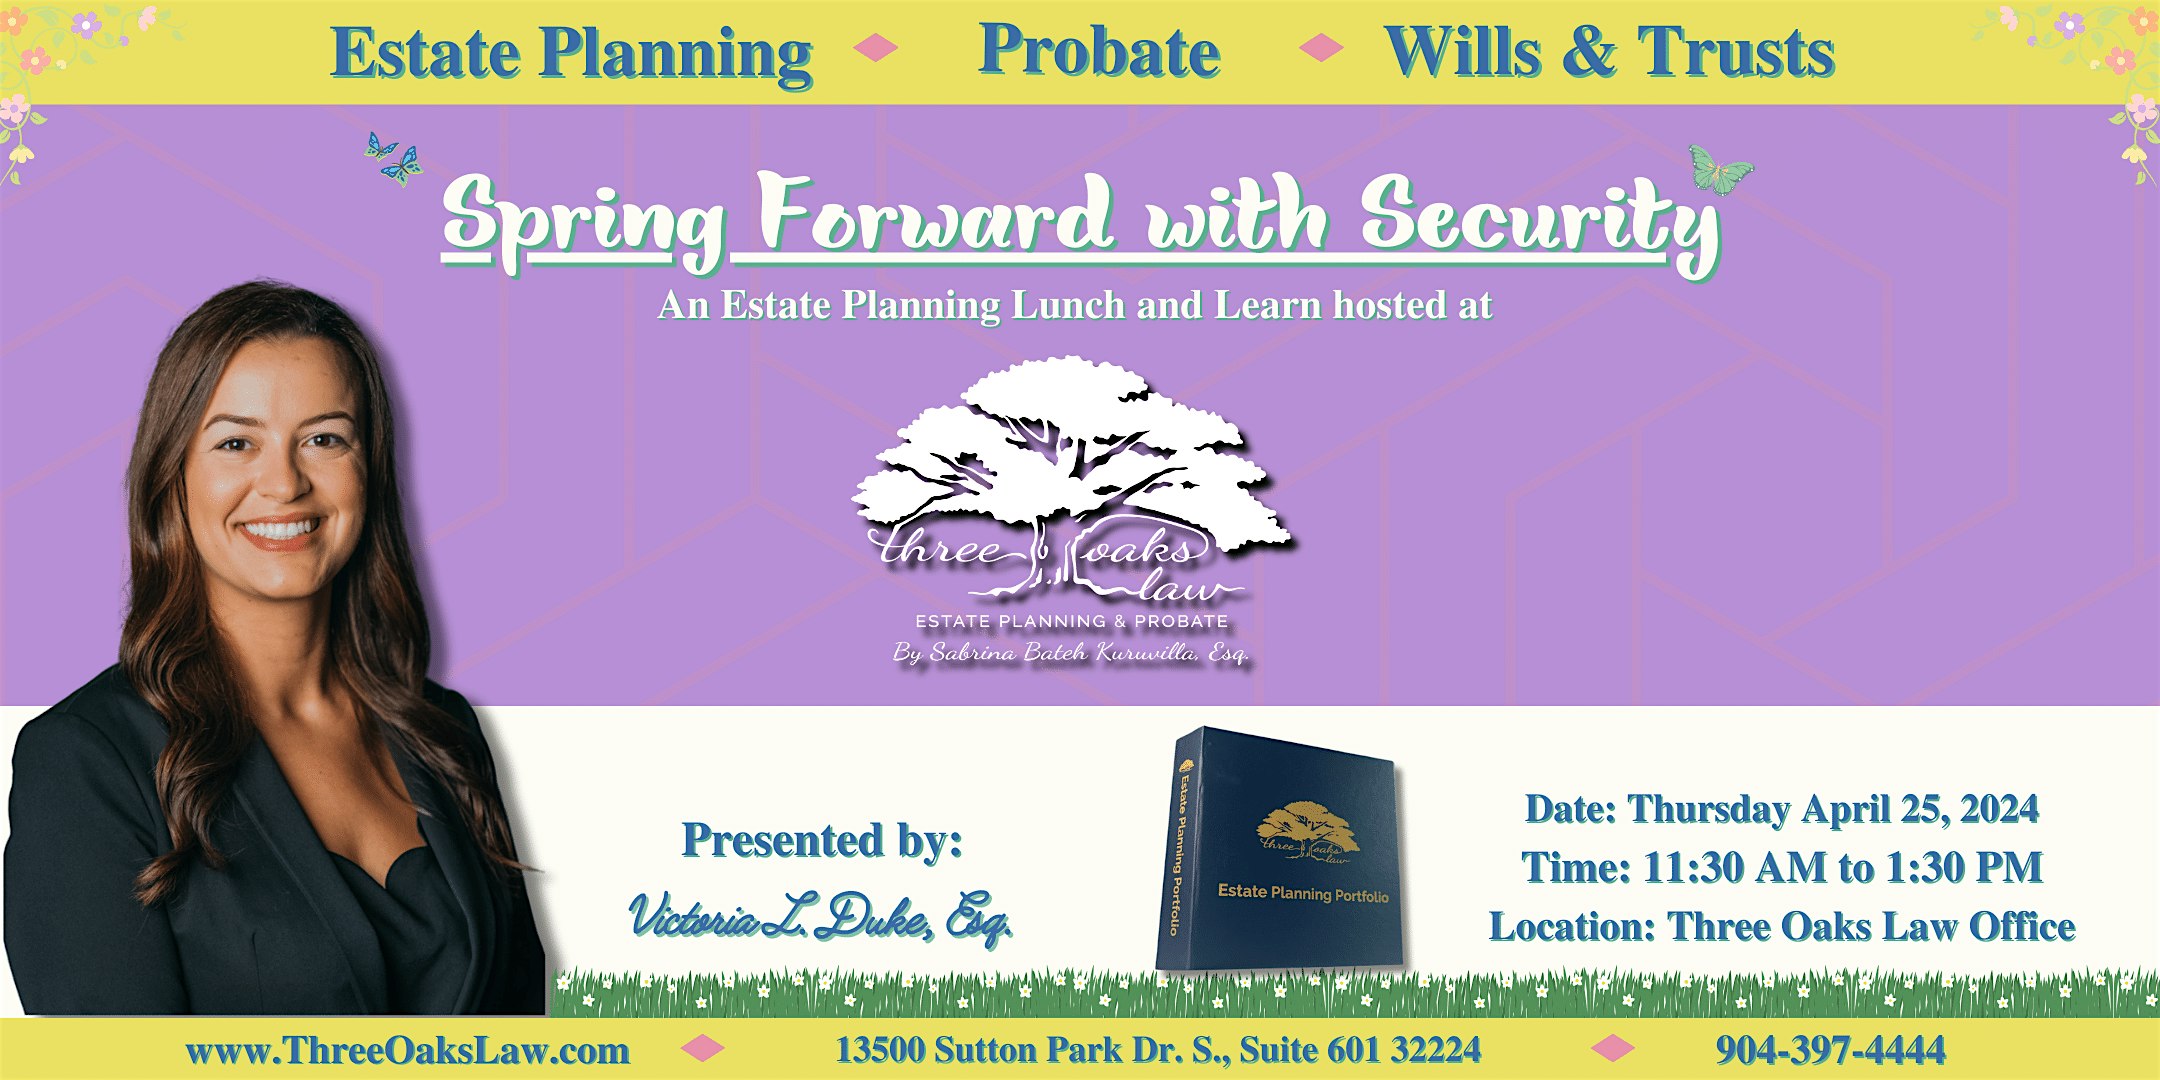 Spring Forward with Security: An Estate Planning Lunch and Learn